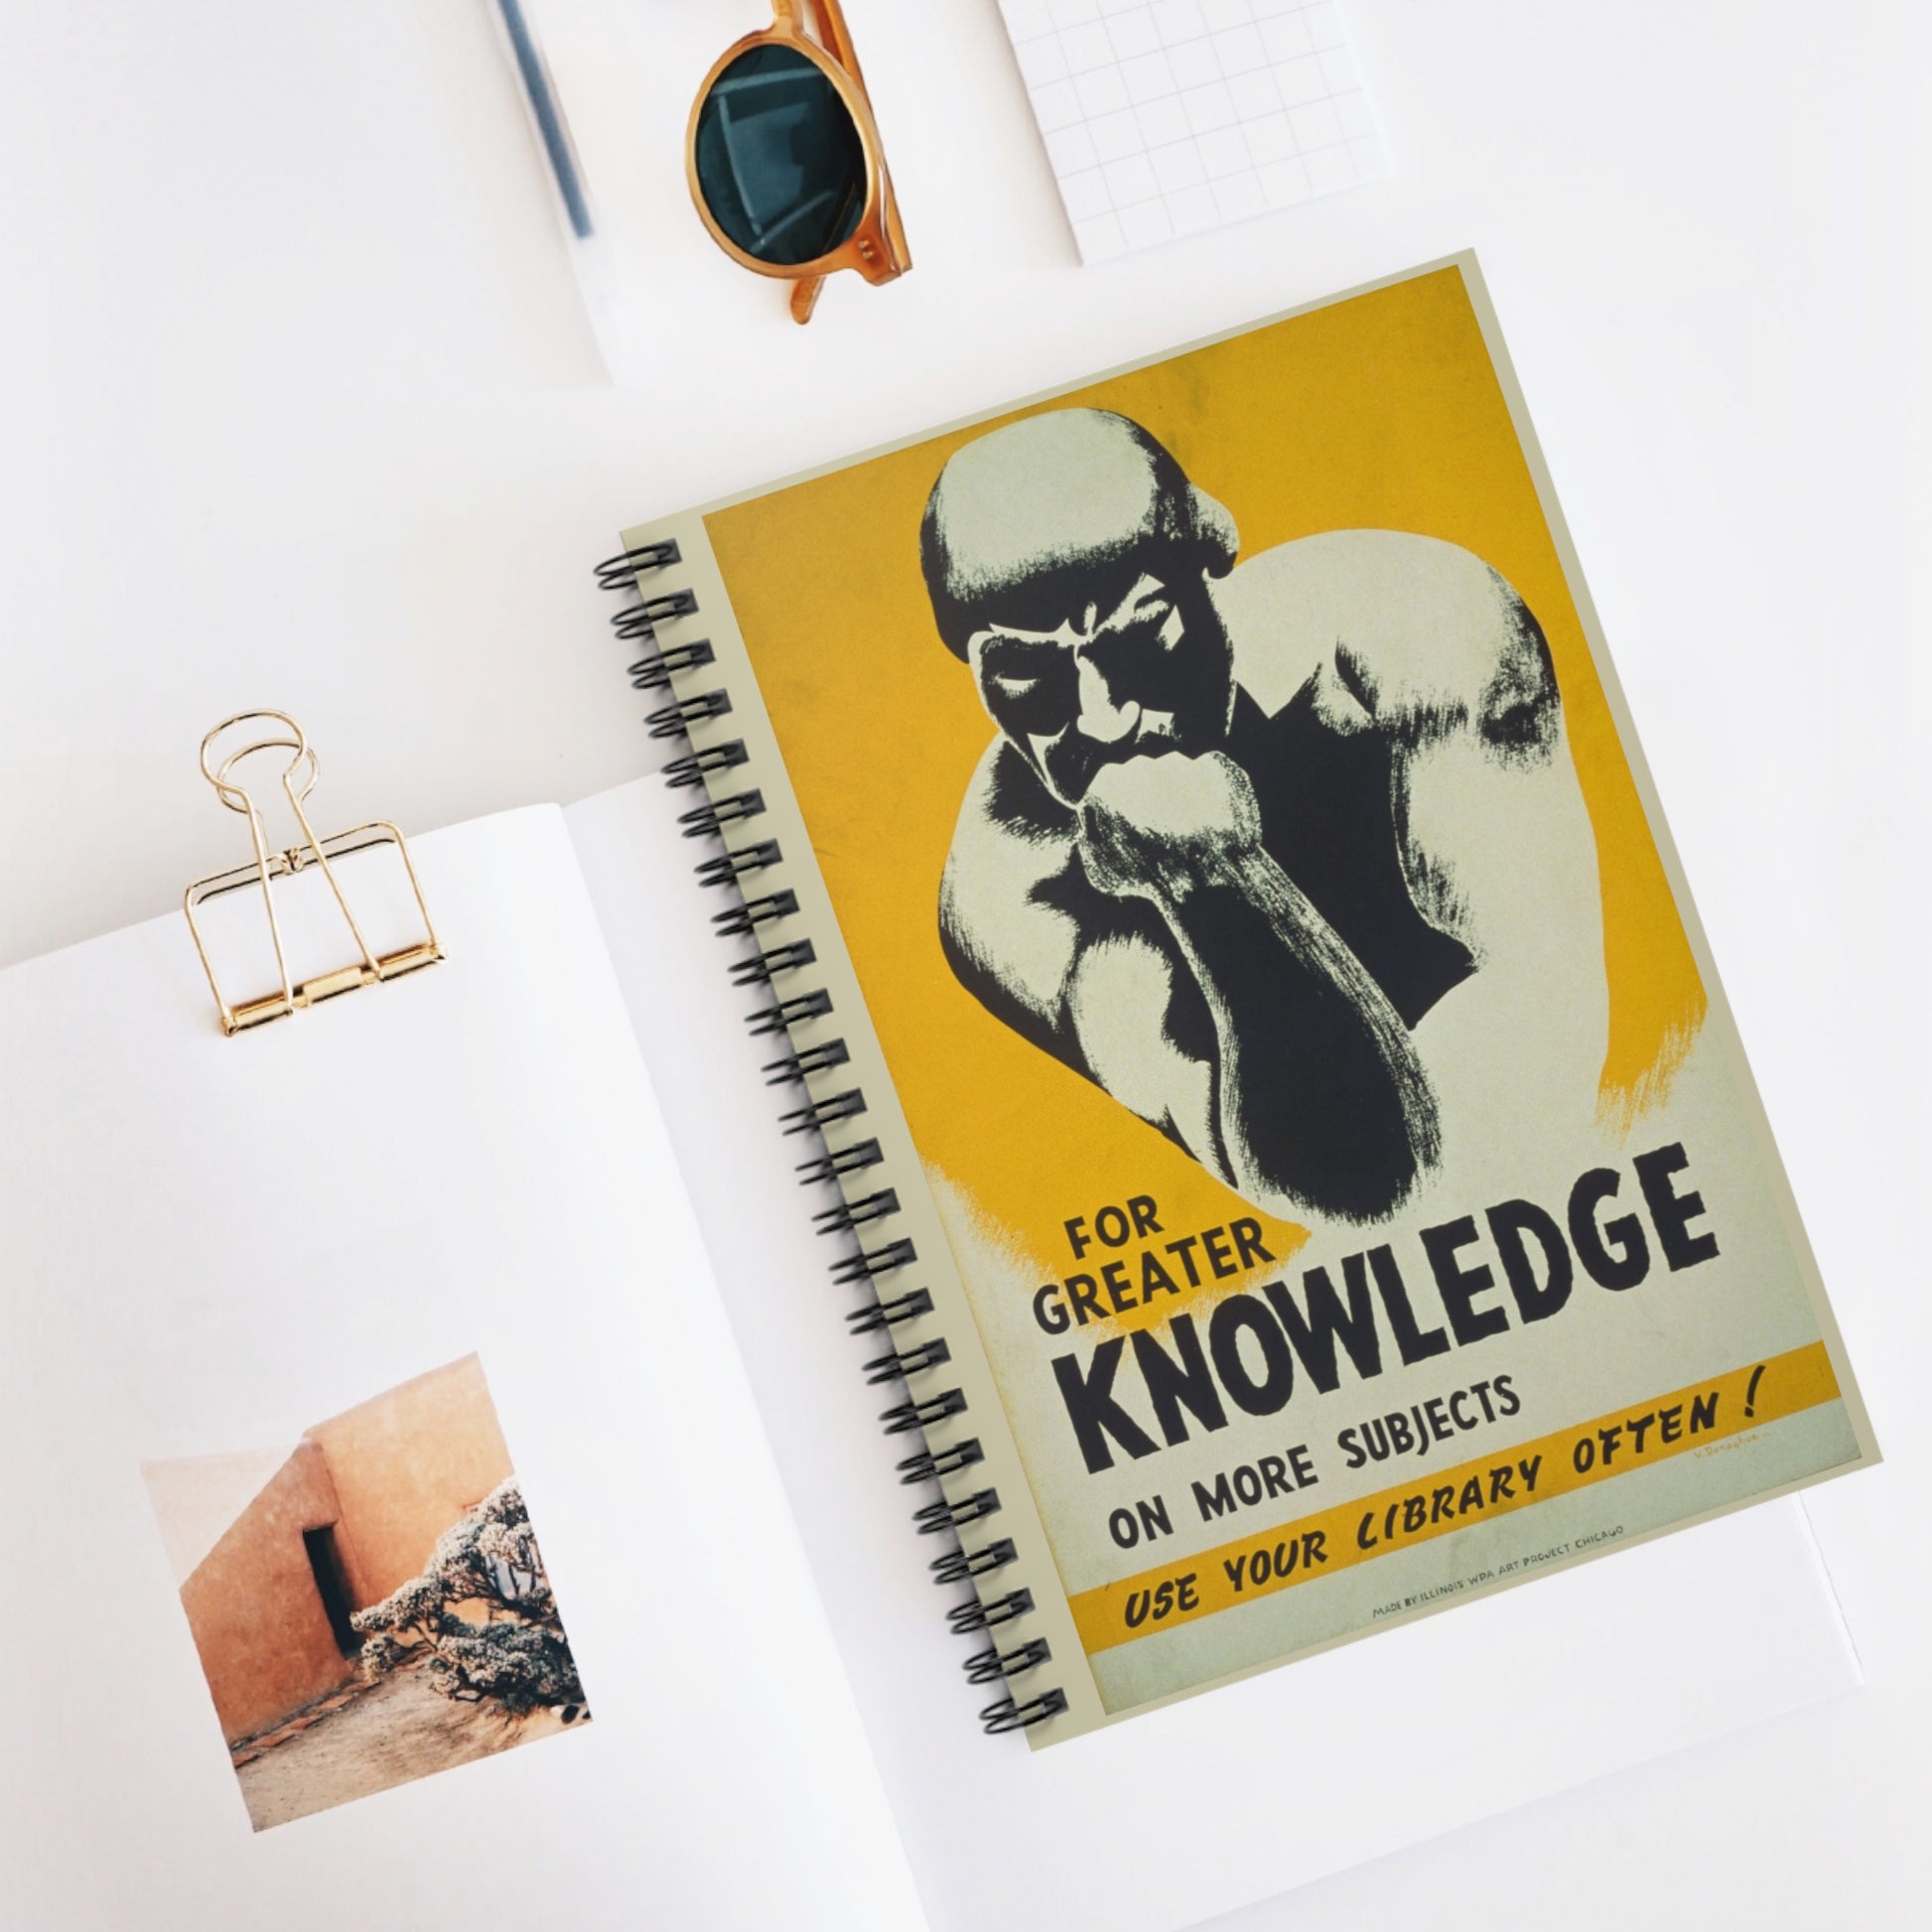 Spiral notebook, front cover is vintage poster with a yellow background and a black and white image of "The Thinker" and has the text "For greater knowledge on more subjects, use your library often!"